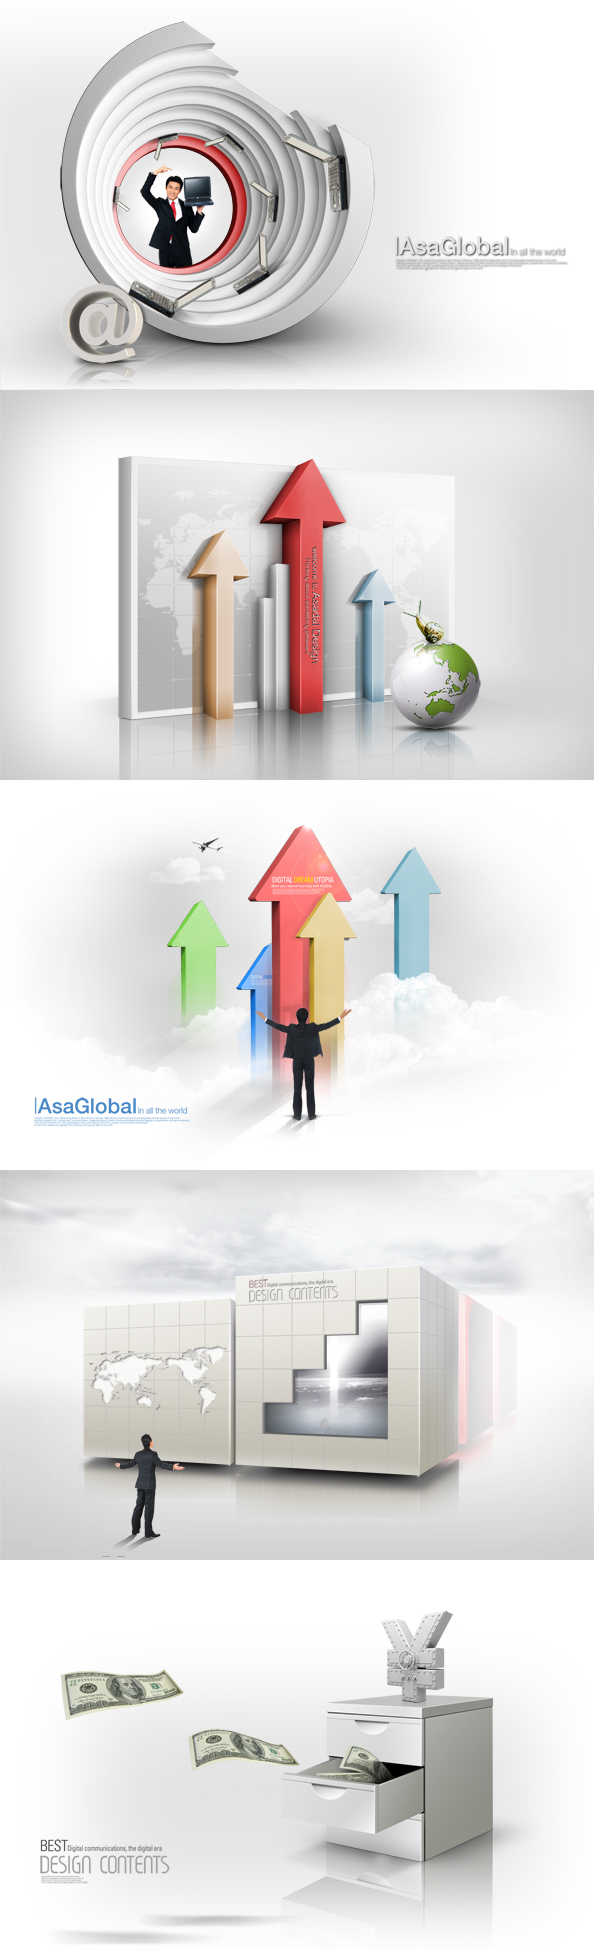 free psd business backgrounds